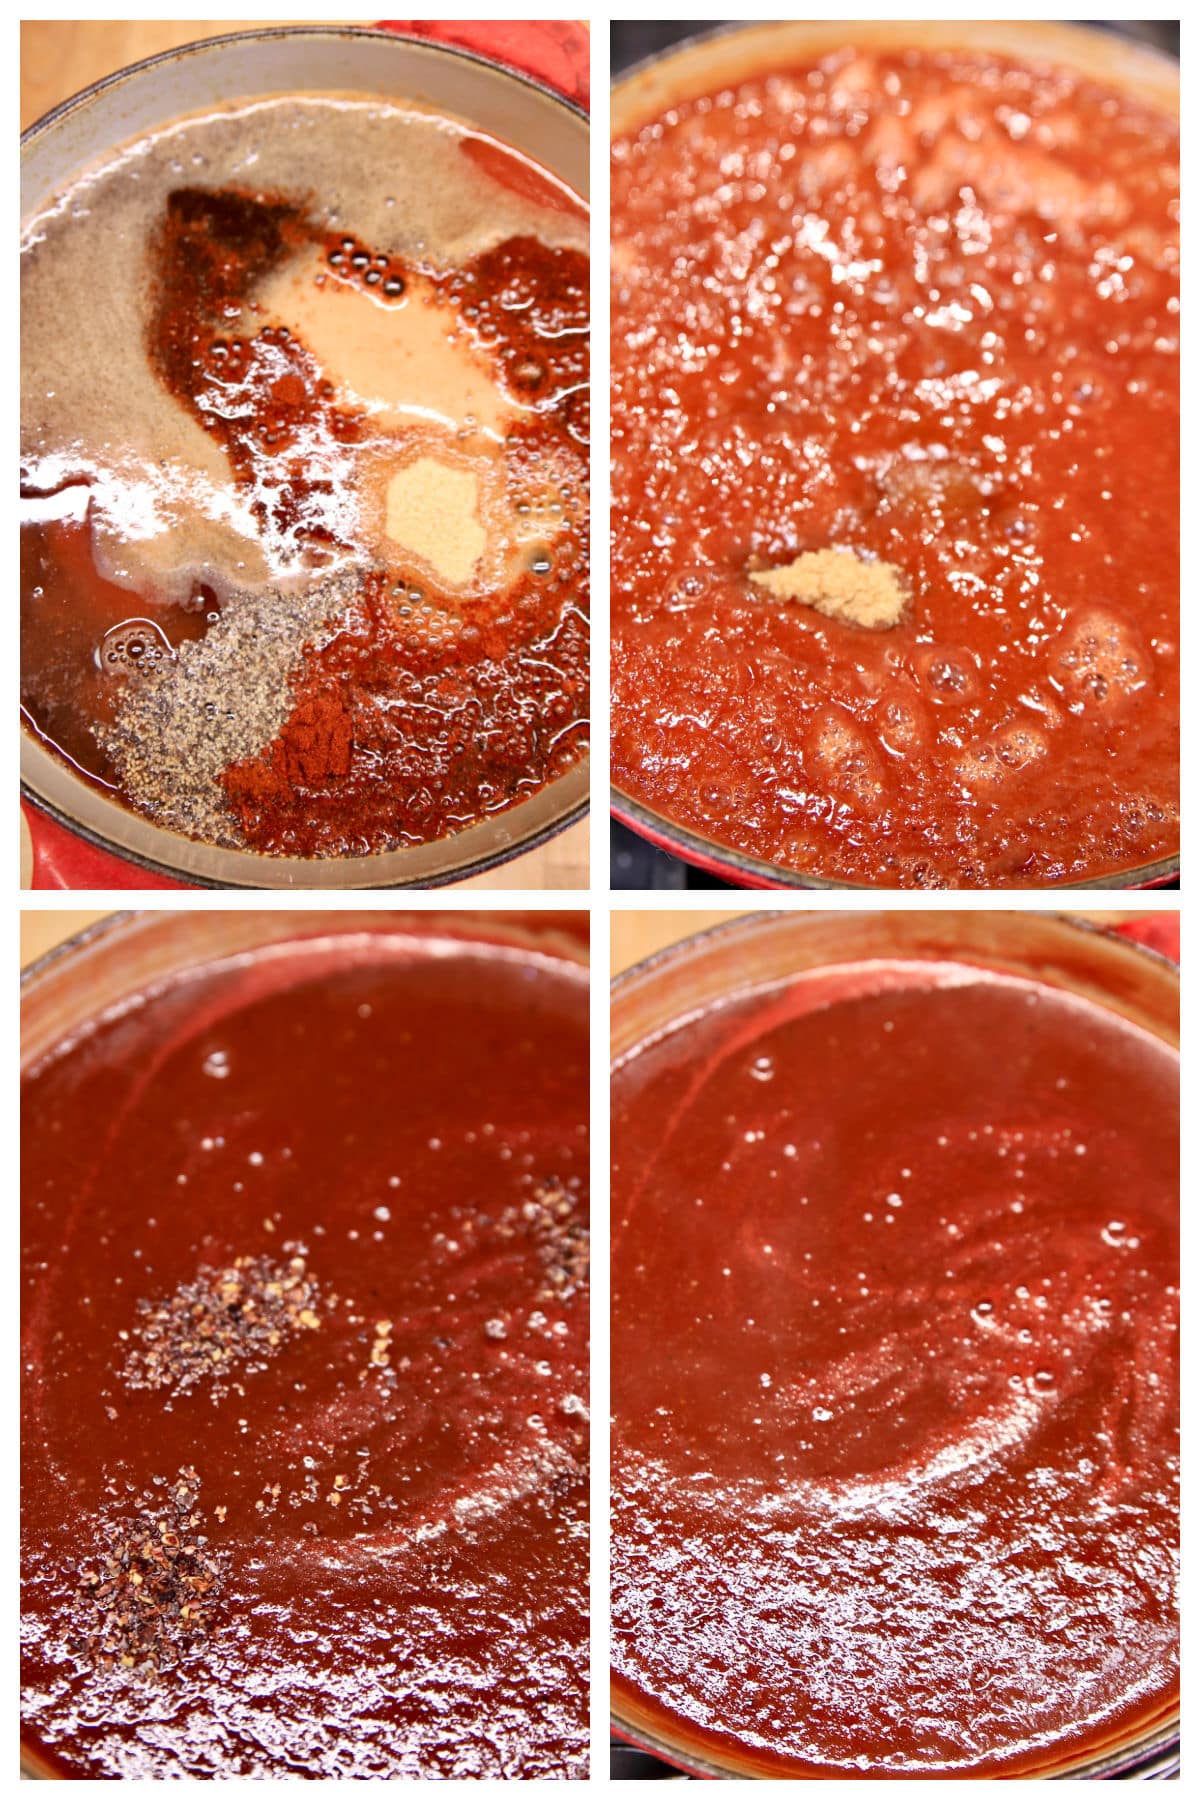 Collage making root beer bbq sauce.